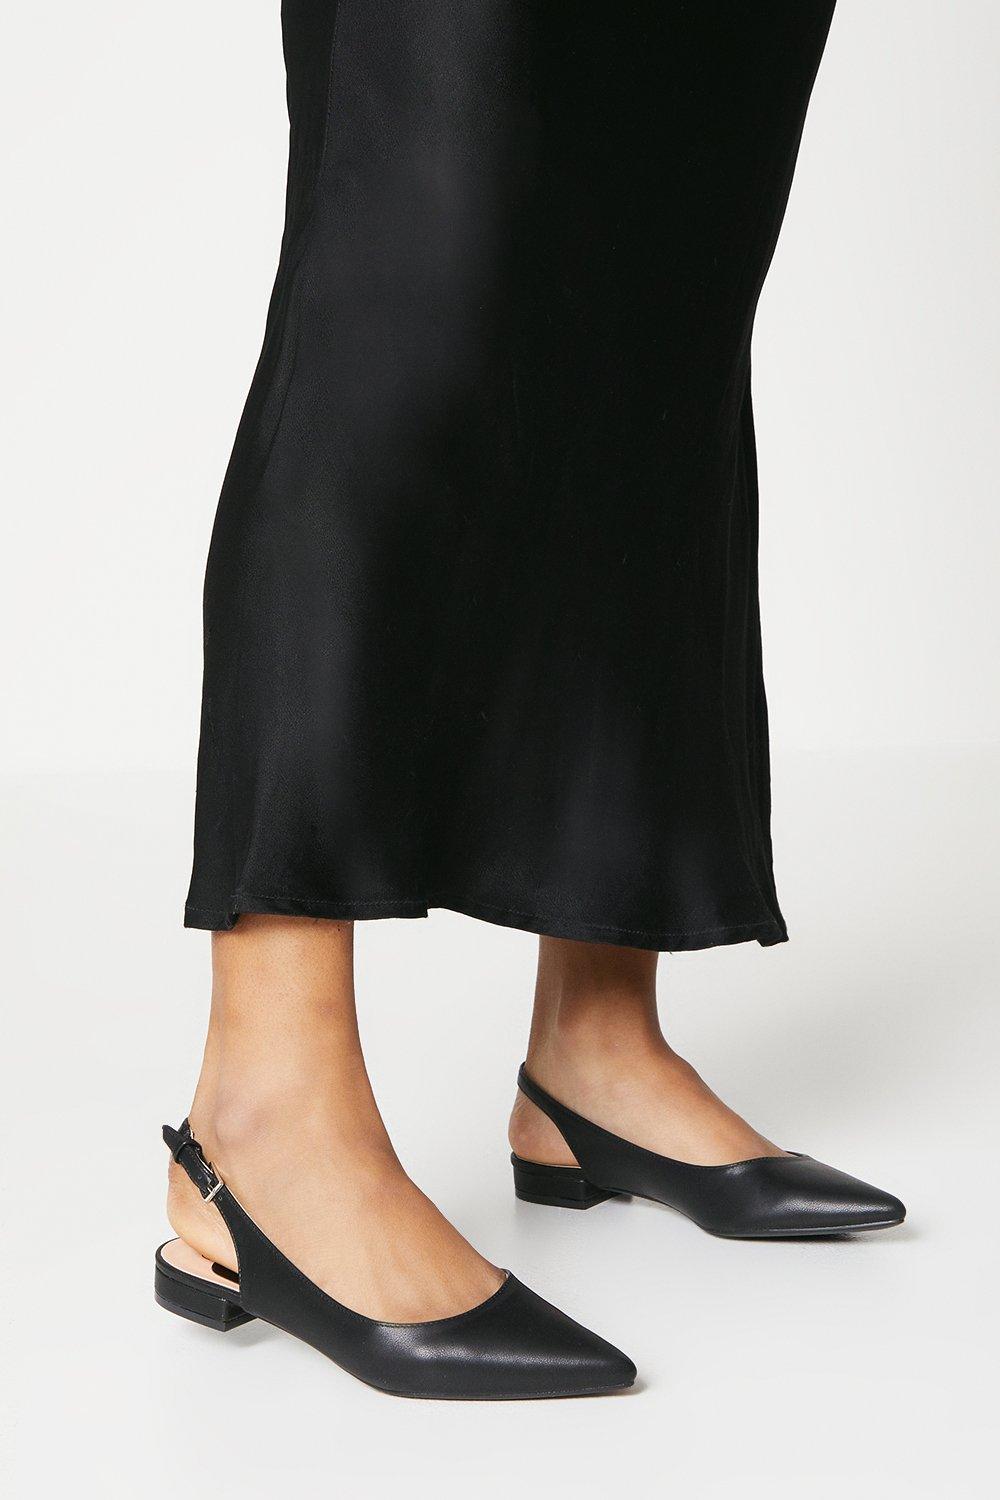 Women’s Pippin Pointed Slingback Ballet Pumps - black - 7